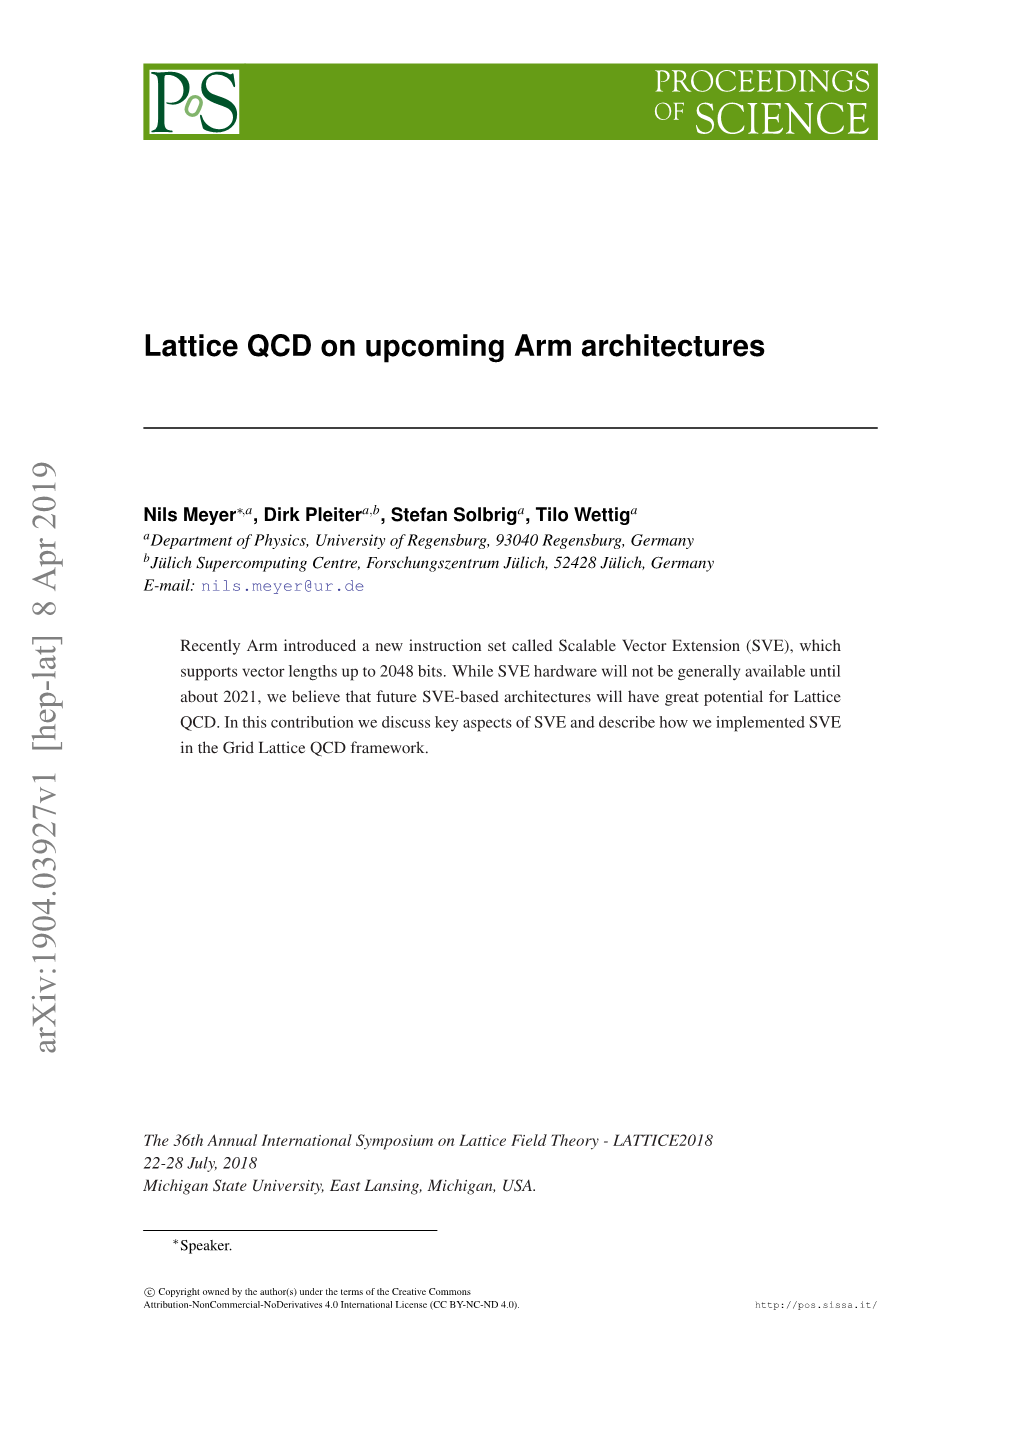 Lattice QCD on Upcoming Arm Architectures